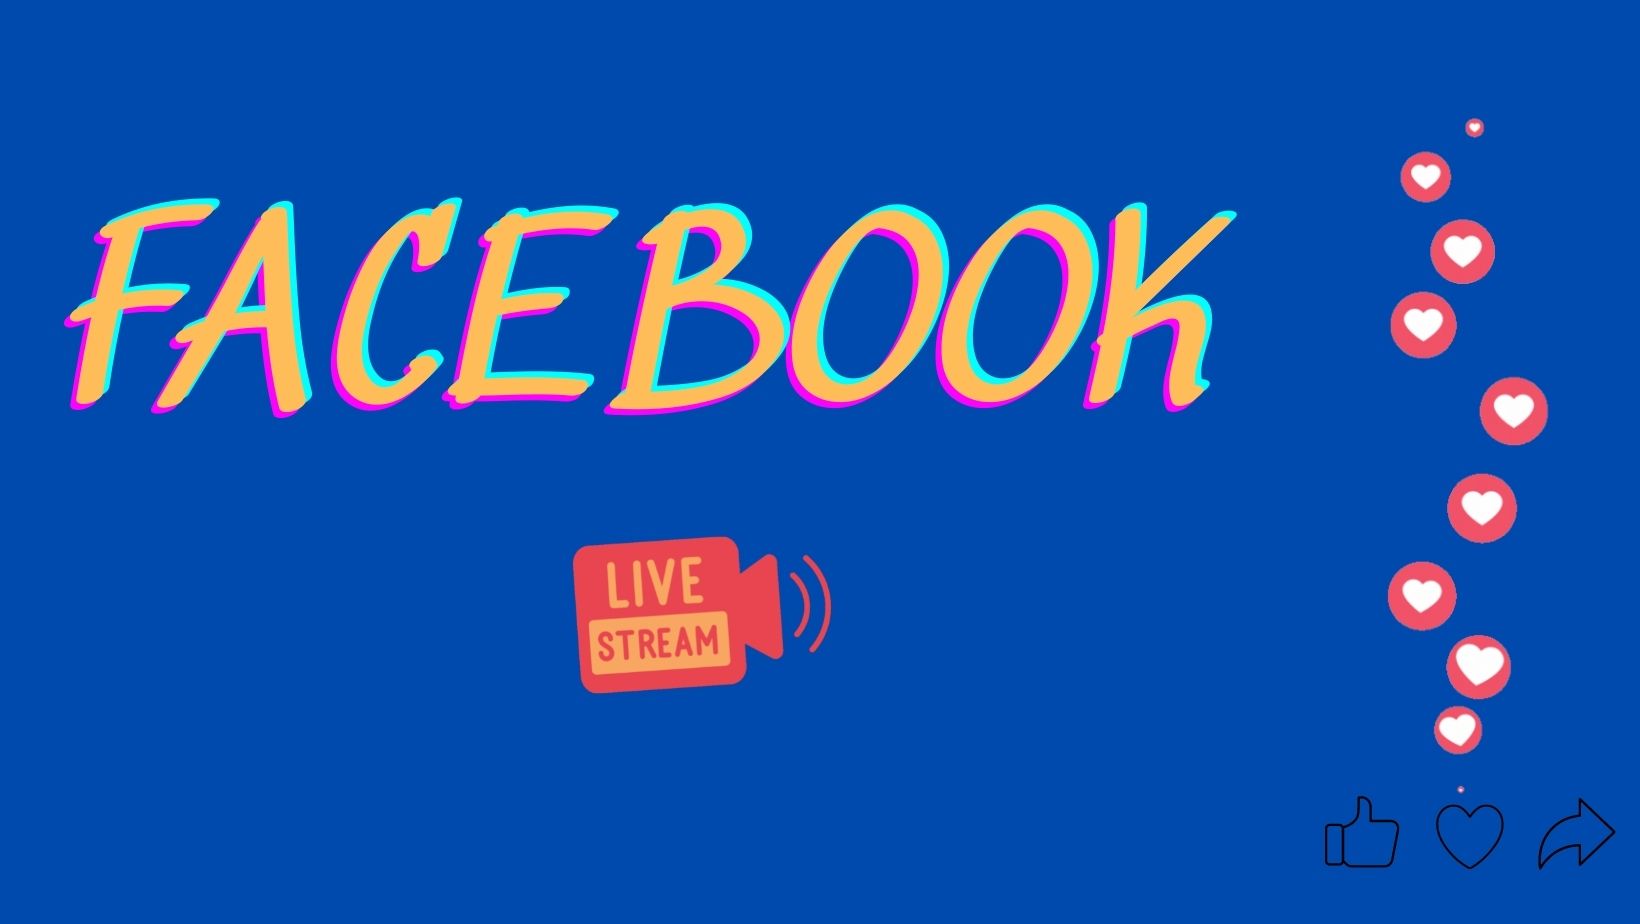 How to stream on Facebook?